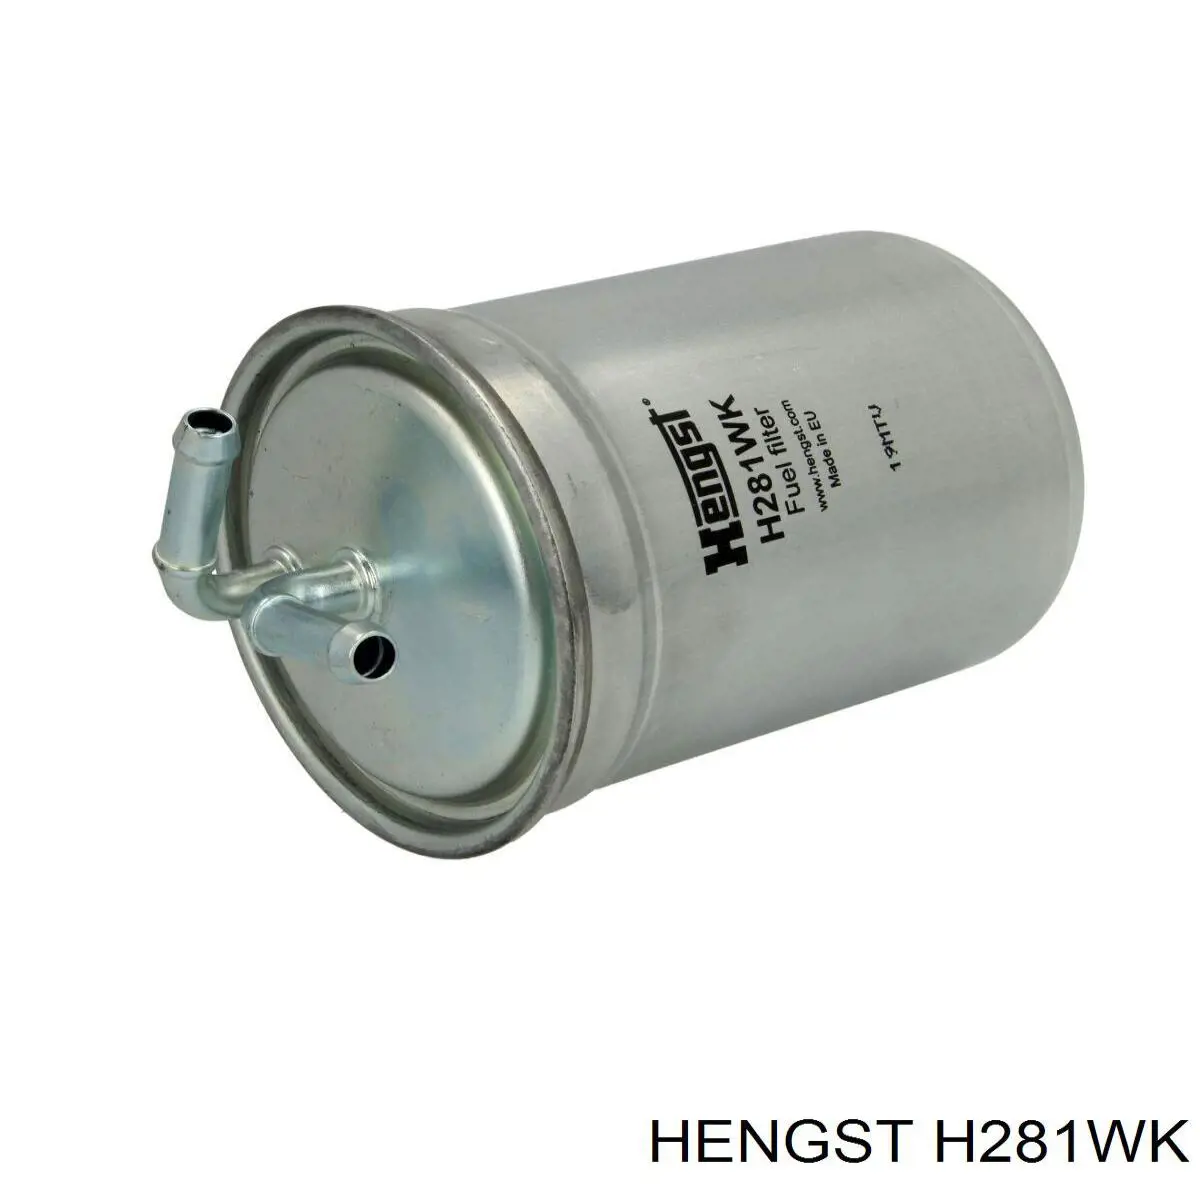 H281WK Hengst filtro combustible